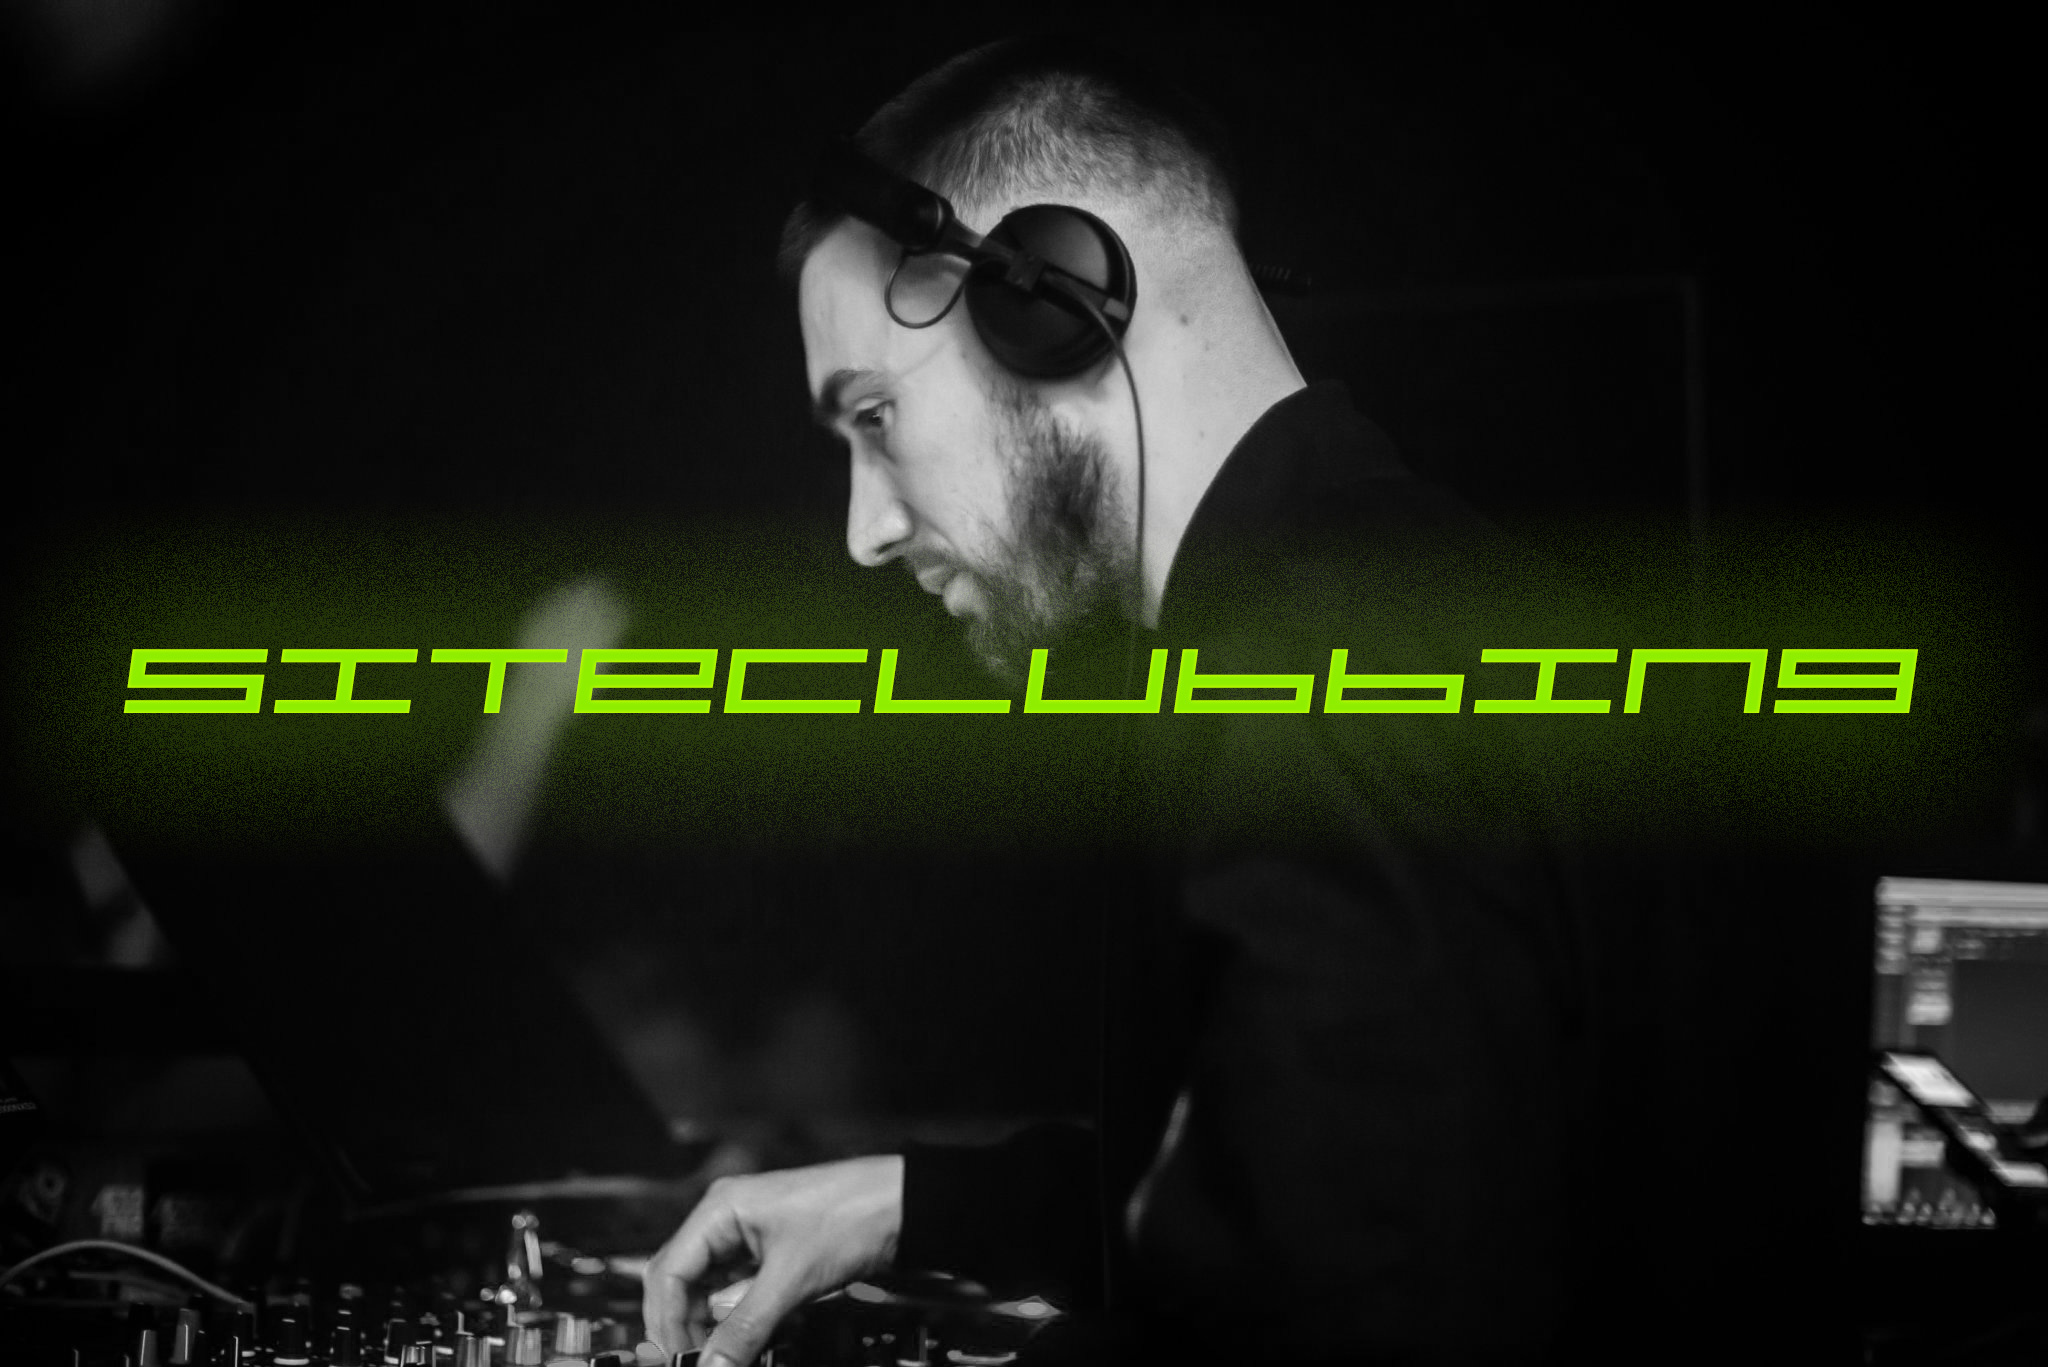 Sully DJing with logo imposed on top